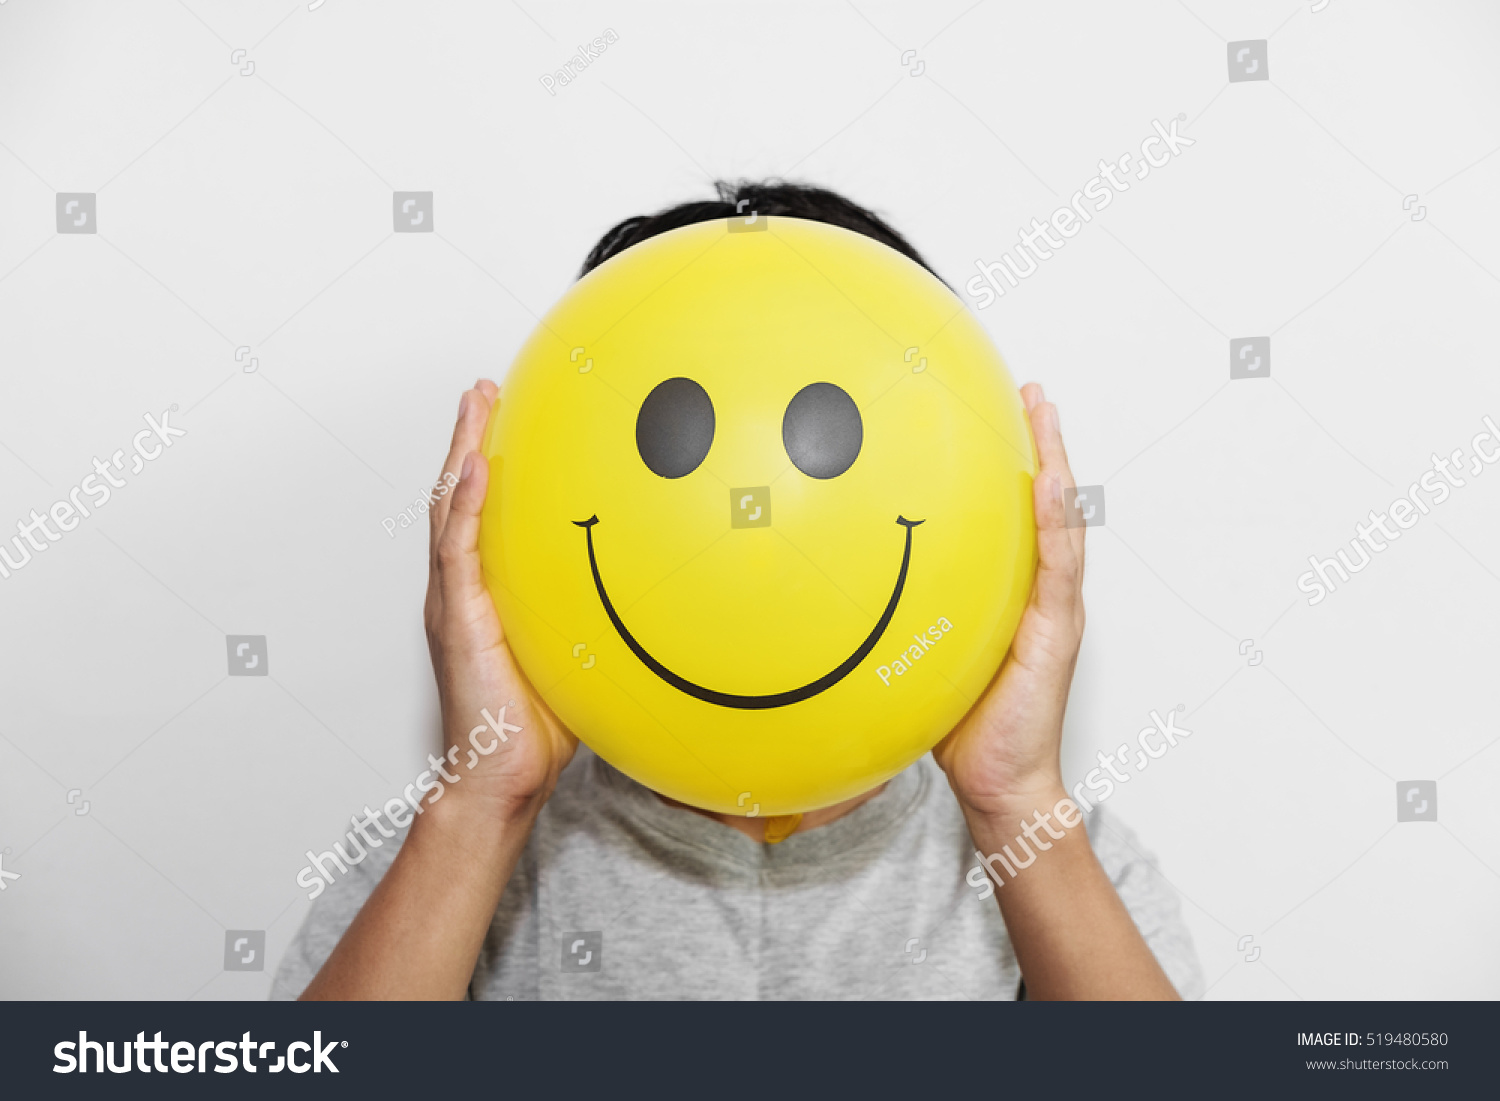 A man holding yellow balloon with smile face emotion instead of head. Positive Thinking concepts. hiding some bad feeling just keep smiling #519480580